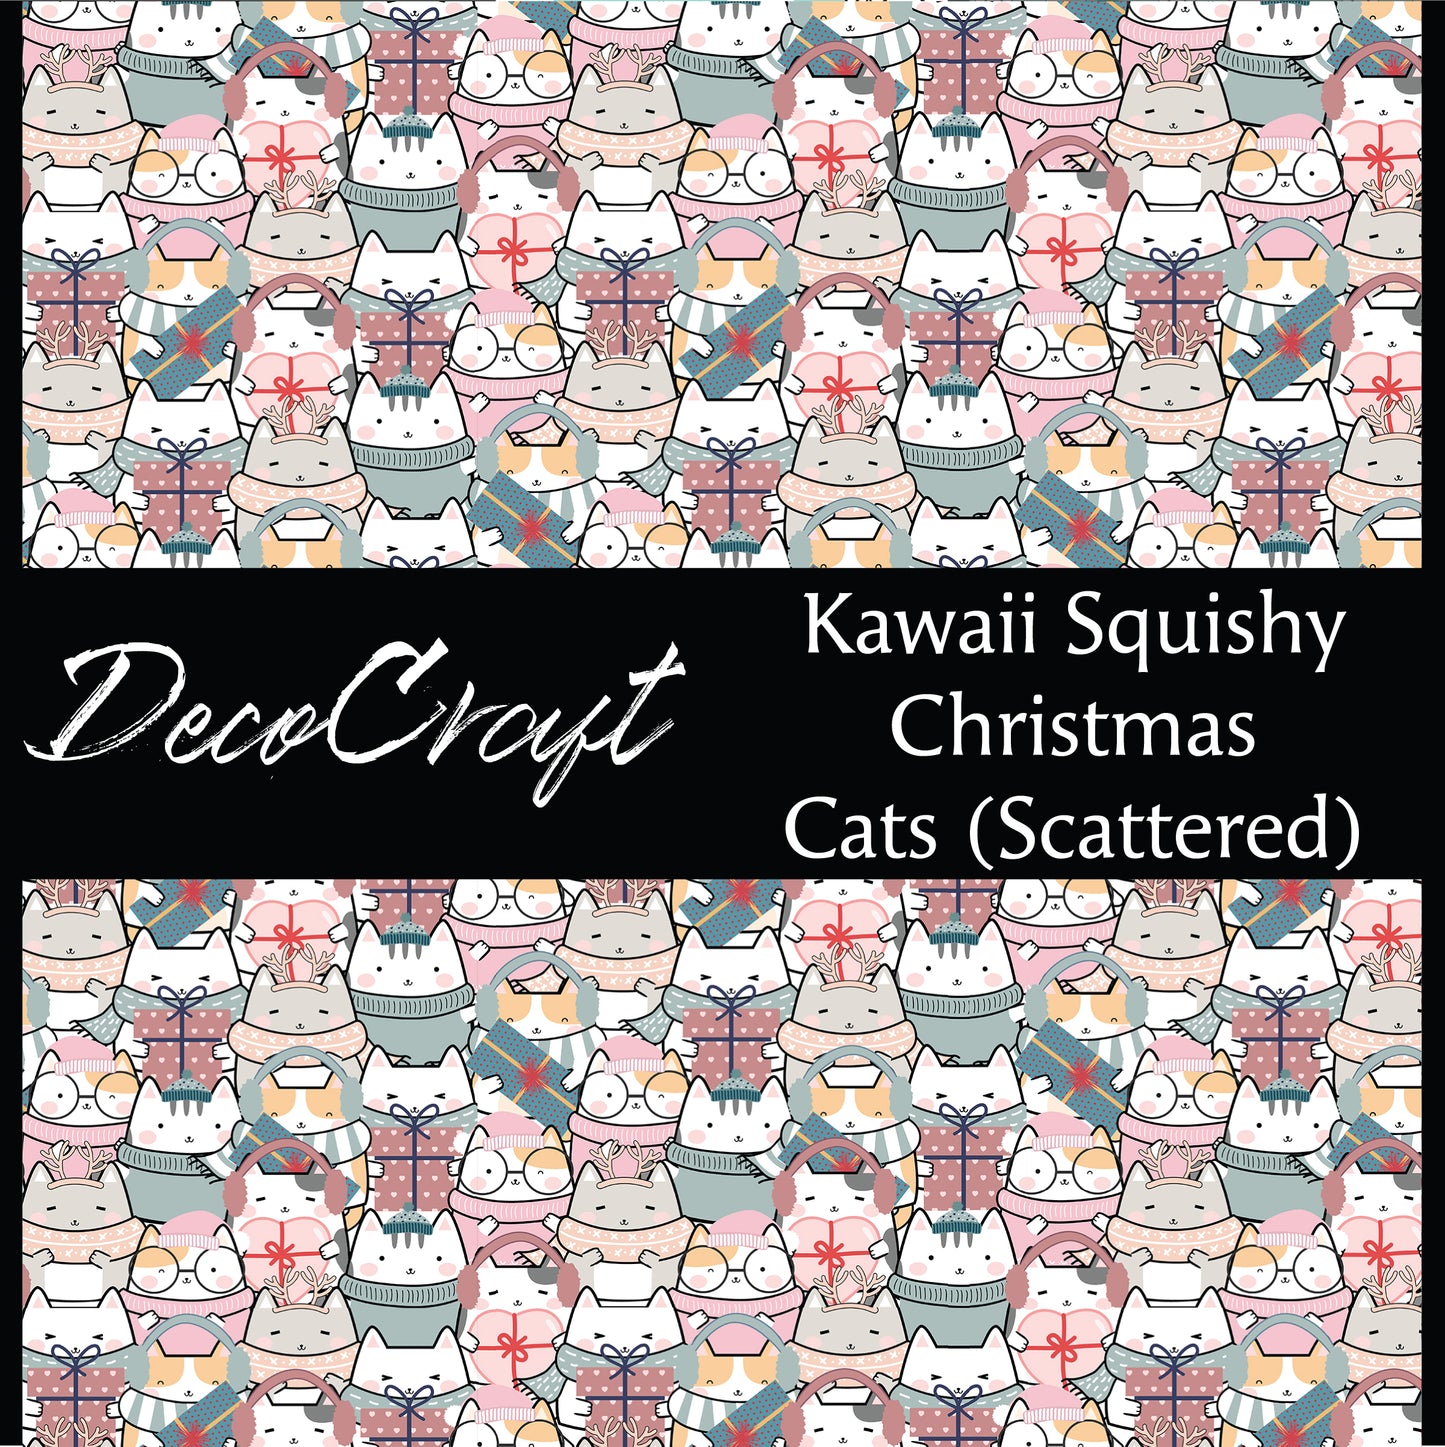 DecoCraft Christmas - Christmas Cats- Kawaii Squishy Christmas Cats - Scattered